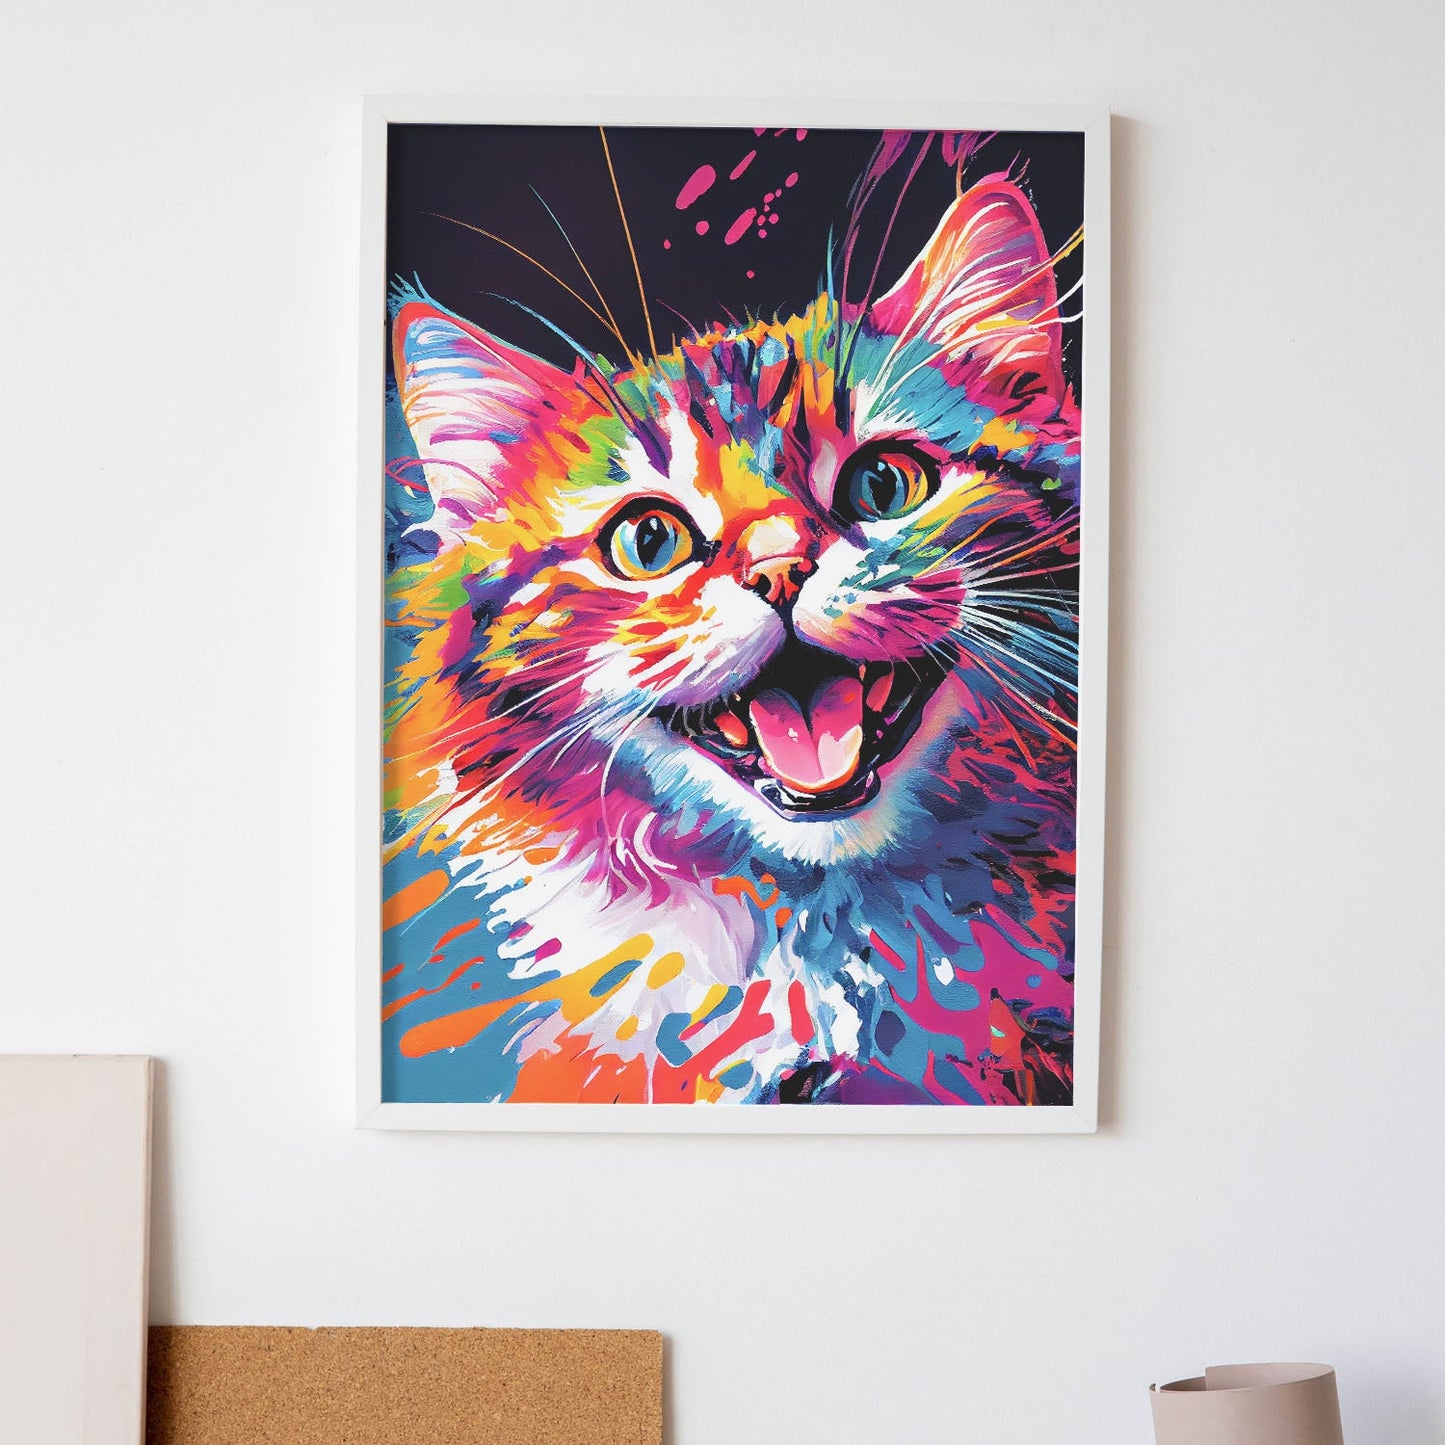 Nacnic Abstract smiling Cat in Lisa Fran Style_2. Aesthetic Wall Art Prints for Bedroom or Living Room Design.